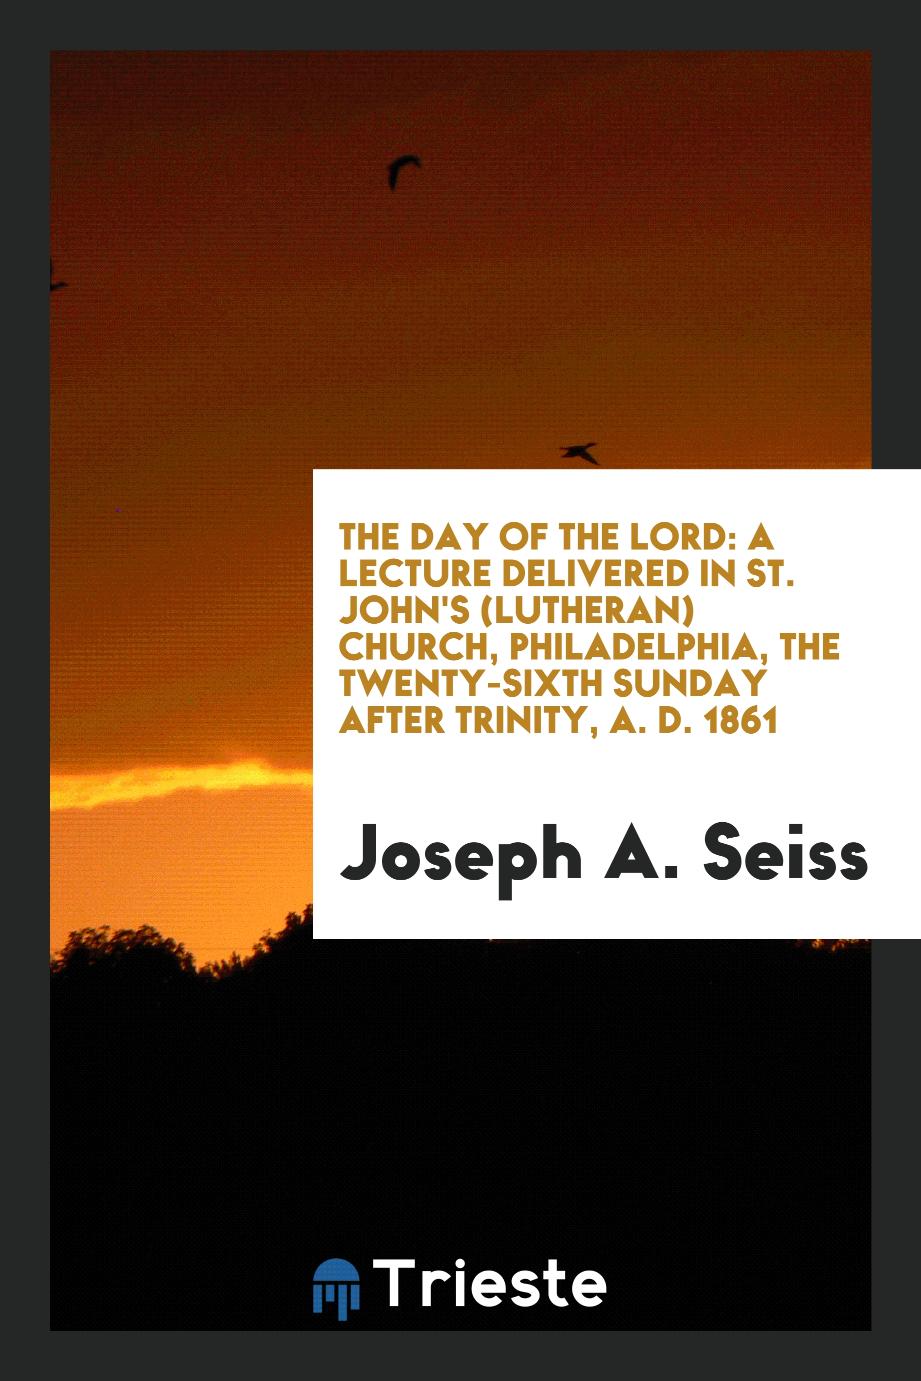 The Day of the Lord: A Lecture Delivered in St. John's (Lutheran) Church, Philadelphia, the twenty-sixth sunday after trinity, A. D. 1861